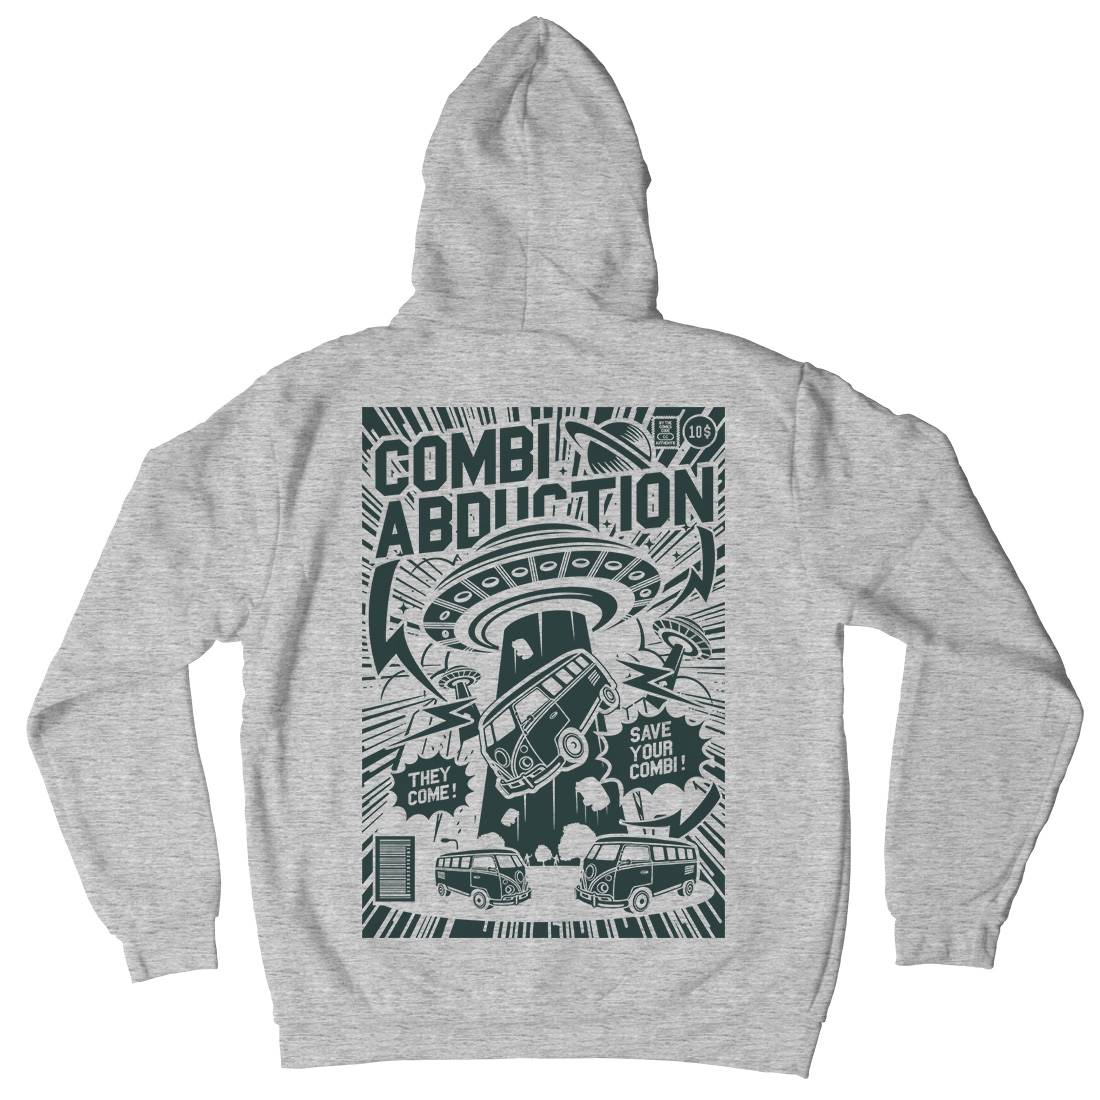 Combi Abduction Mens Hoodie With Pocket Space A220